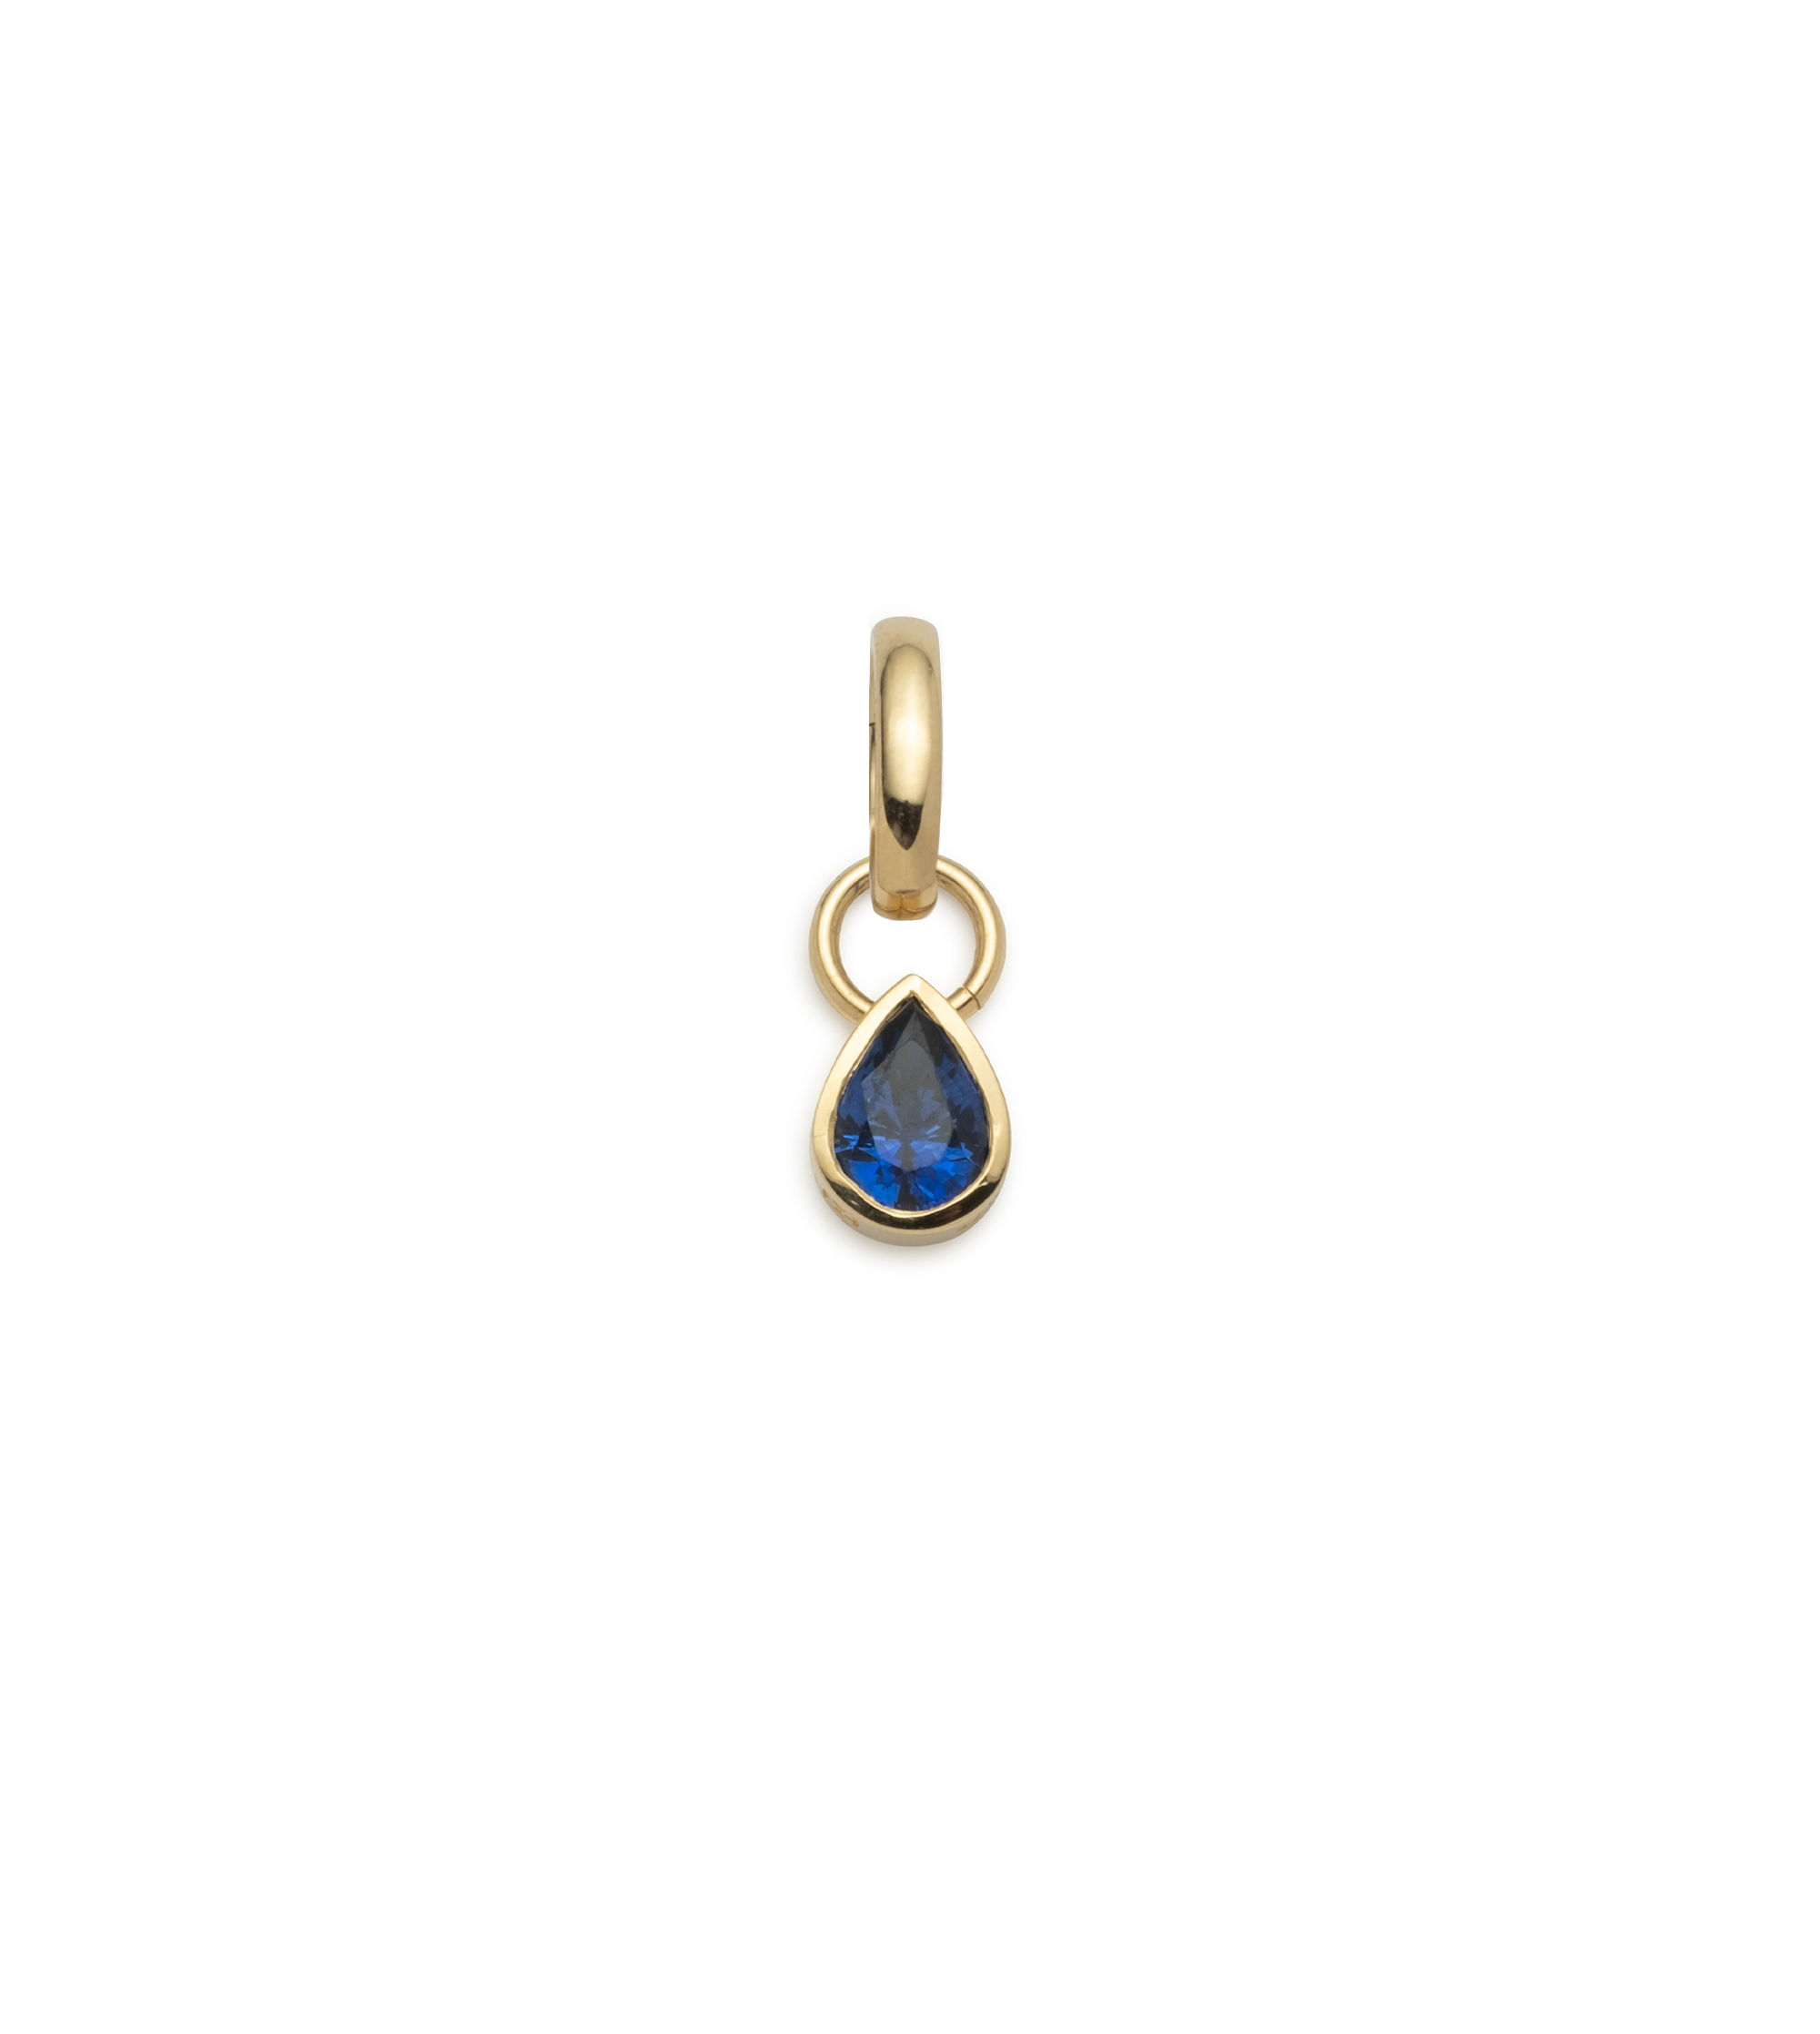 Forever & Always a Pair - Love : 0.8ct Blue Sapphire Pear Pendant with Oval Push Gate